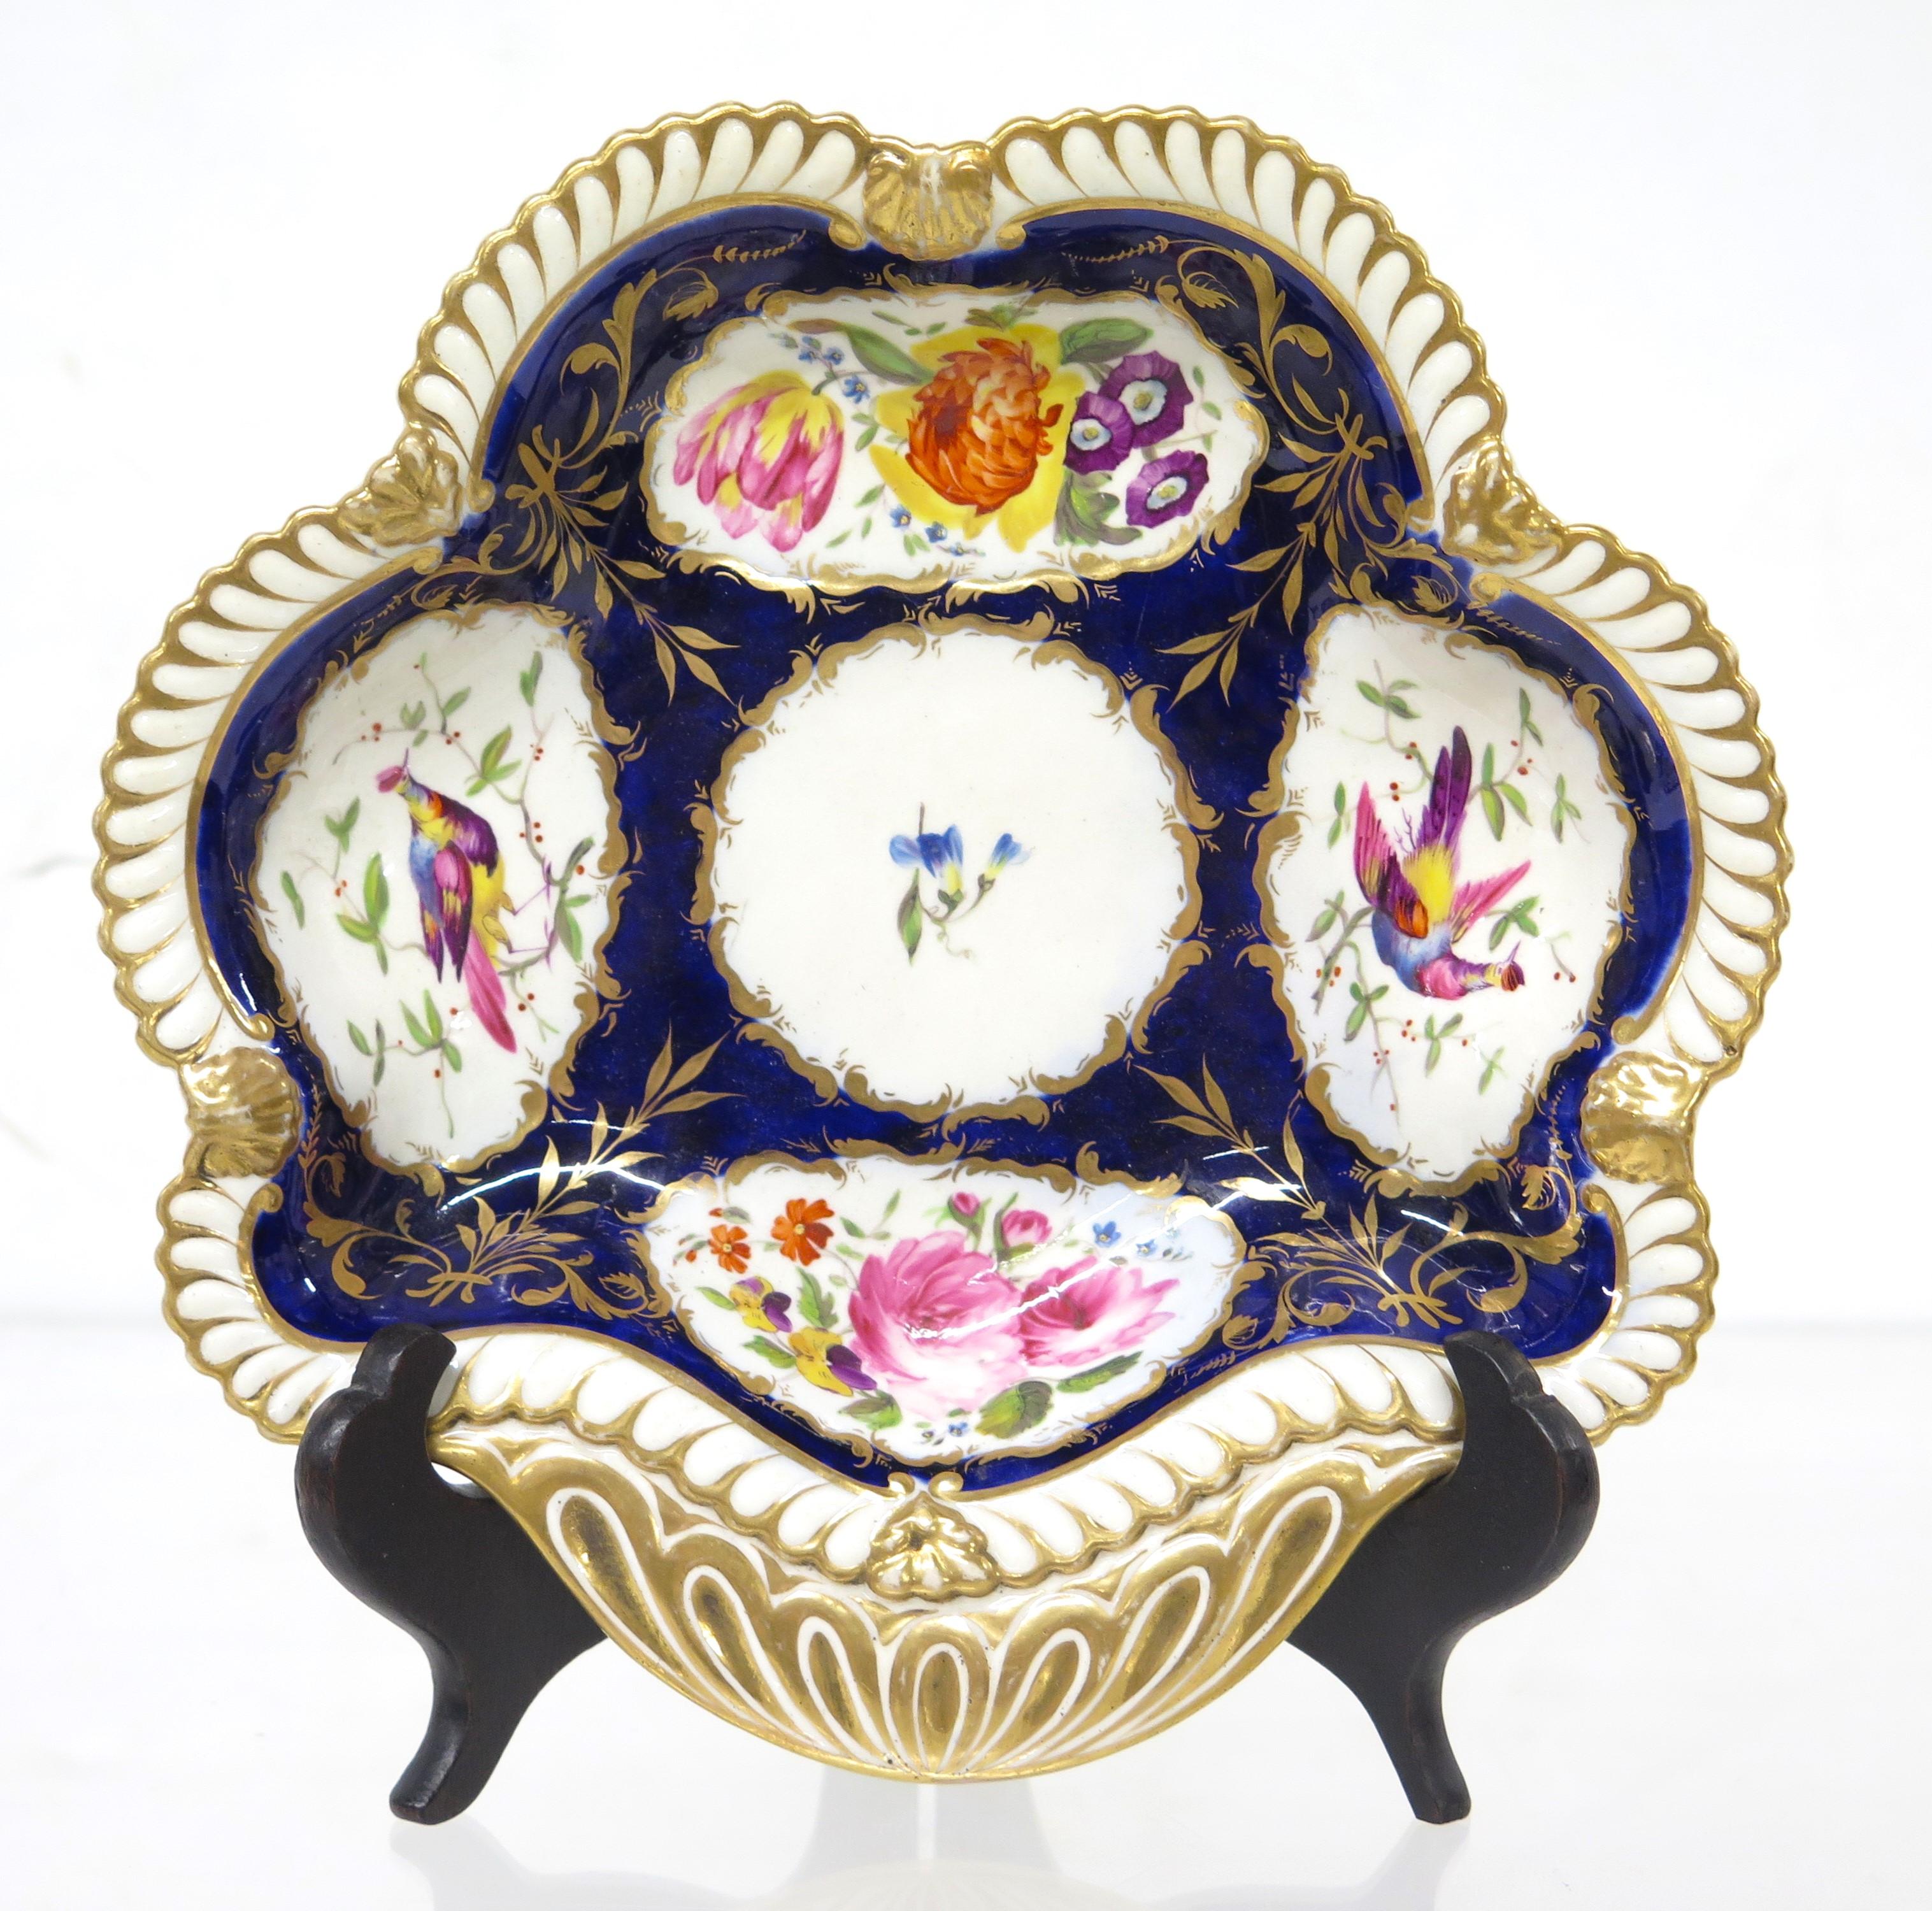 19th Century A Group of Royal Crown Derby-Style Cobalt & Floral Hand-Painted China For Sale